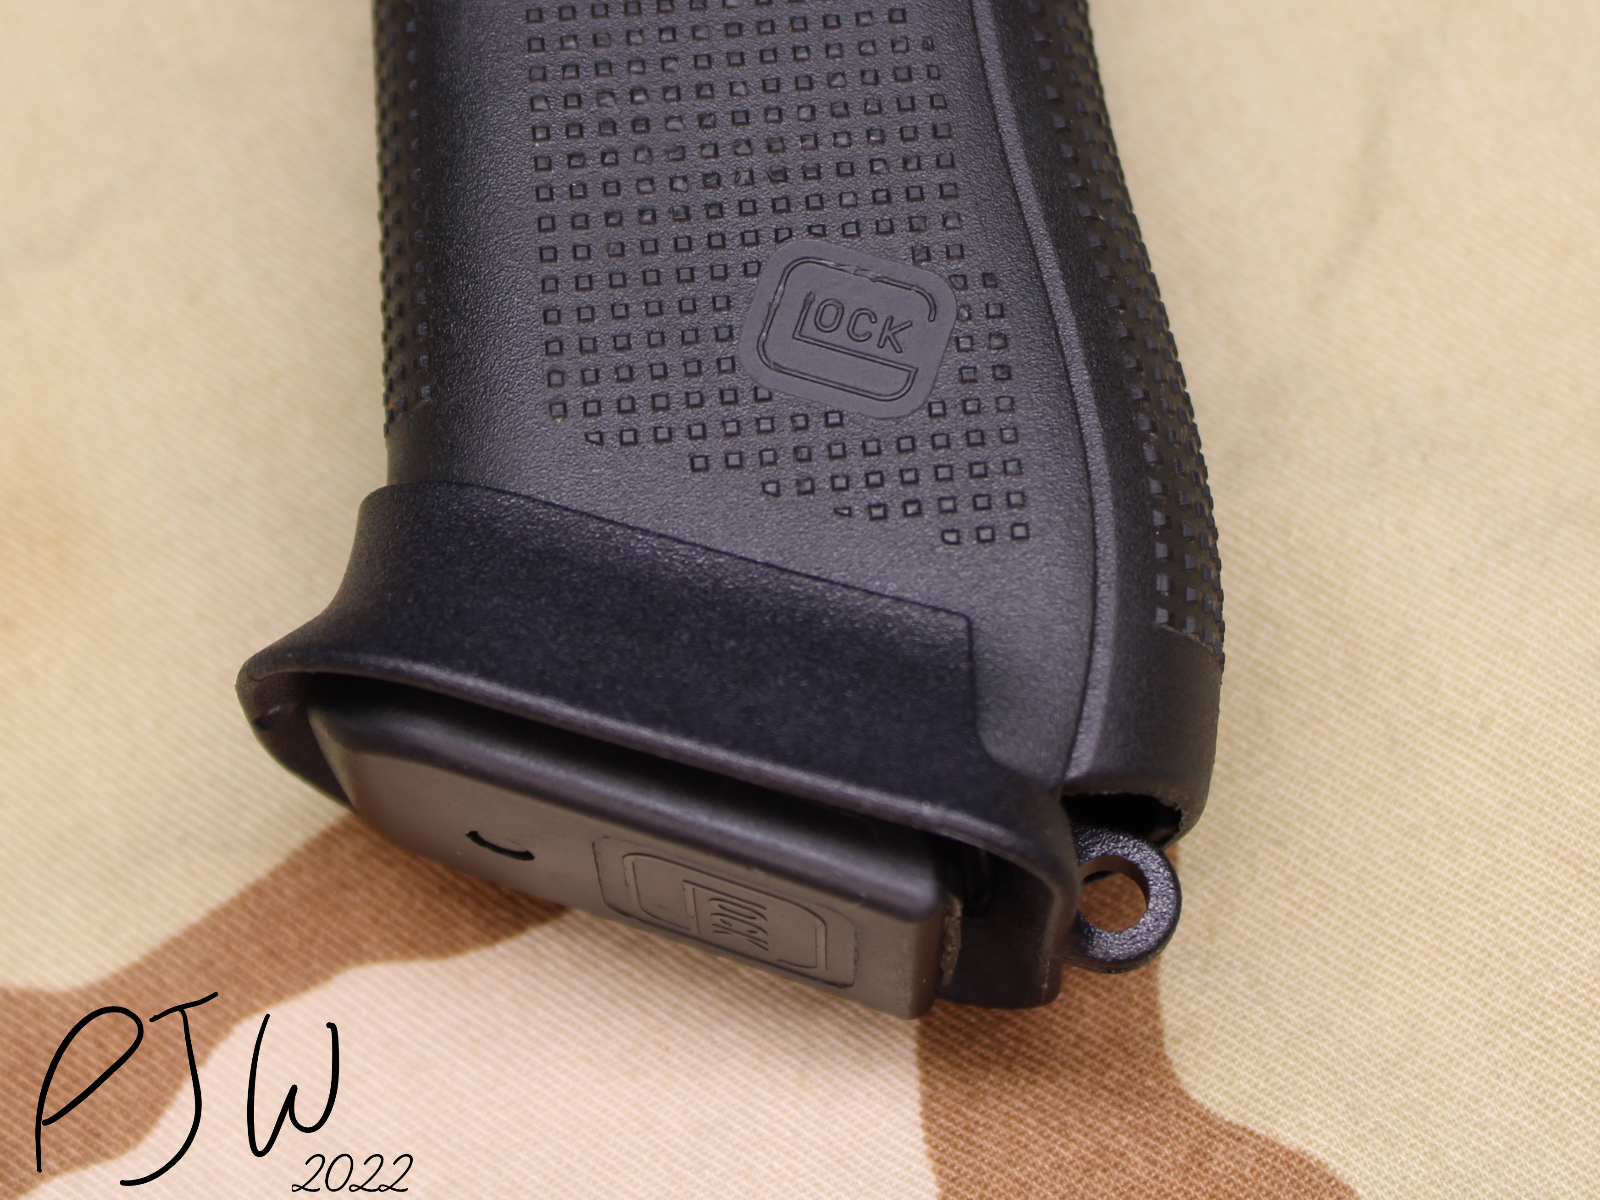 Glock OEM Magwell Mounted Left Side